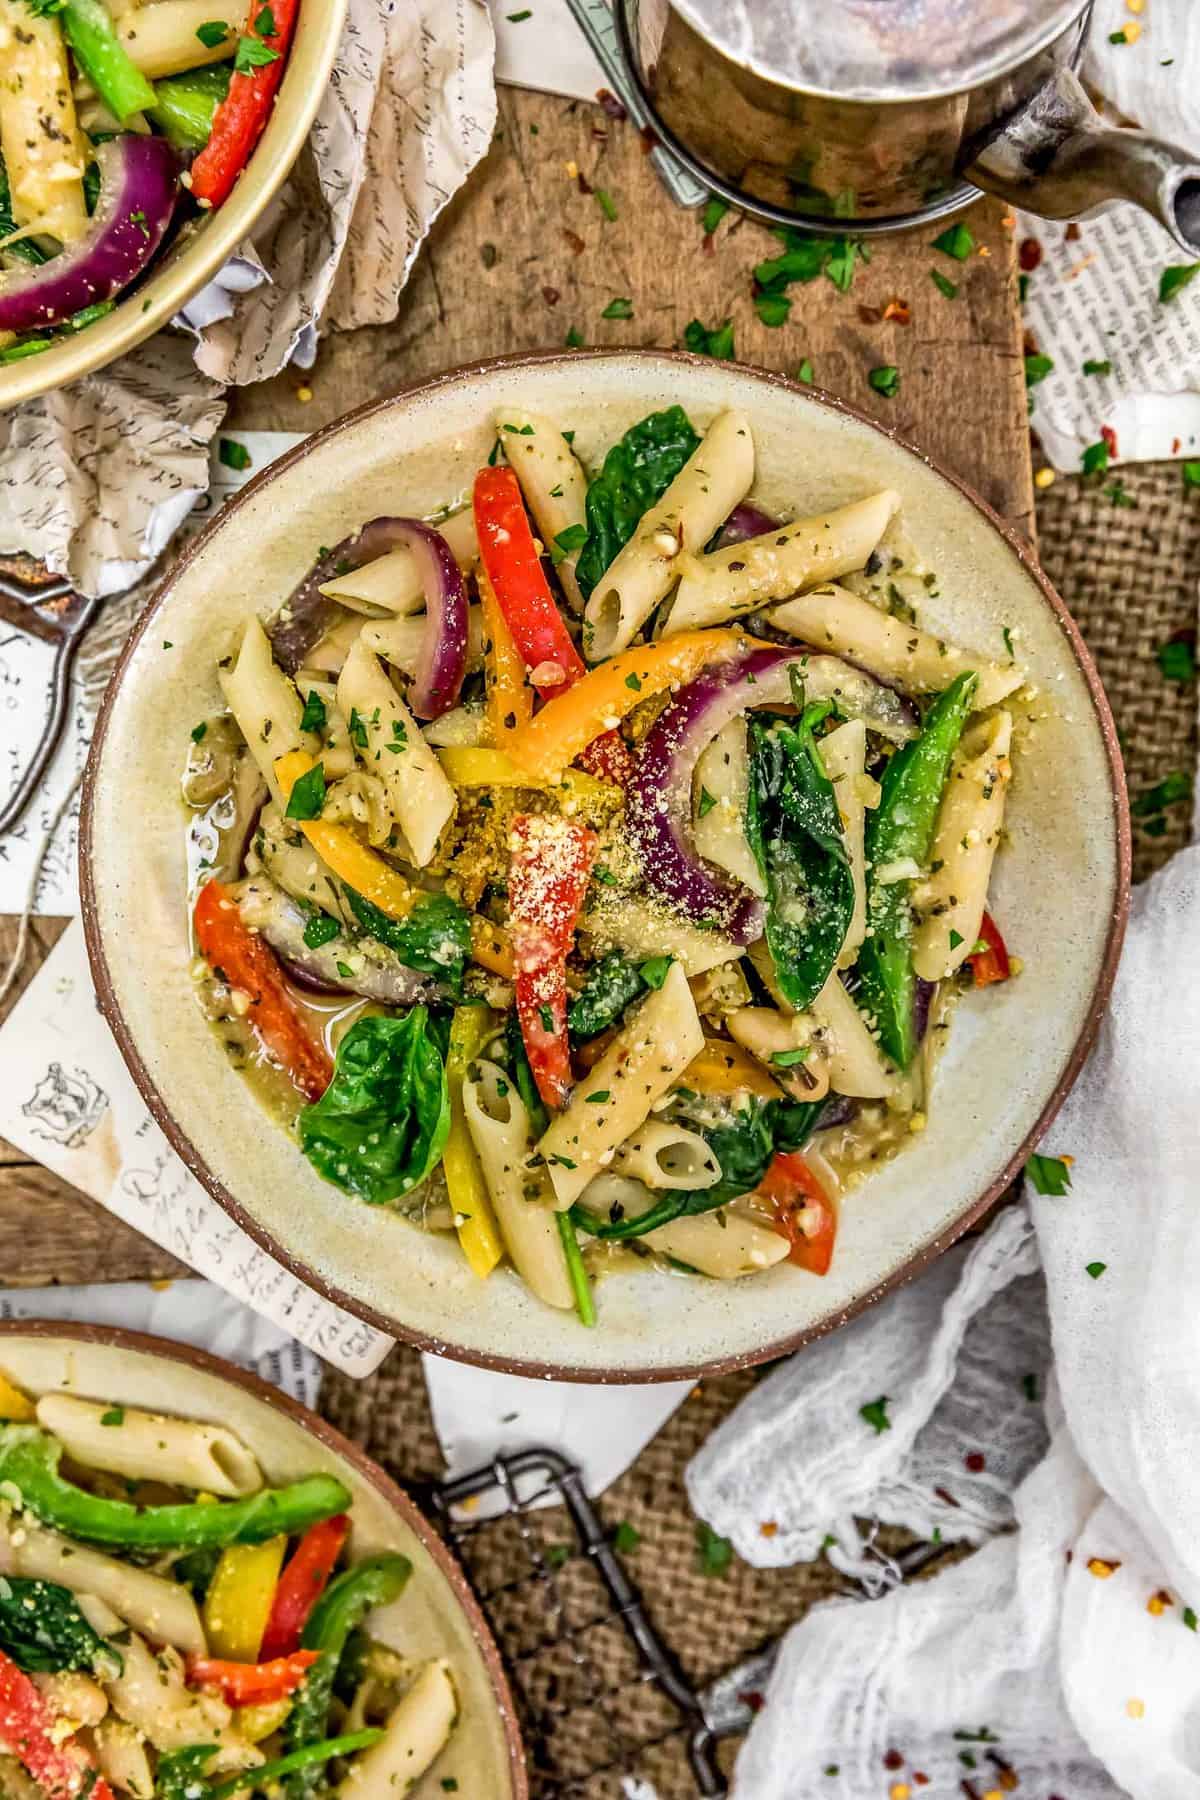 Italian Pasta and Peppers